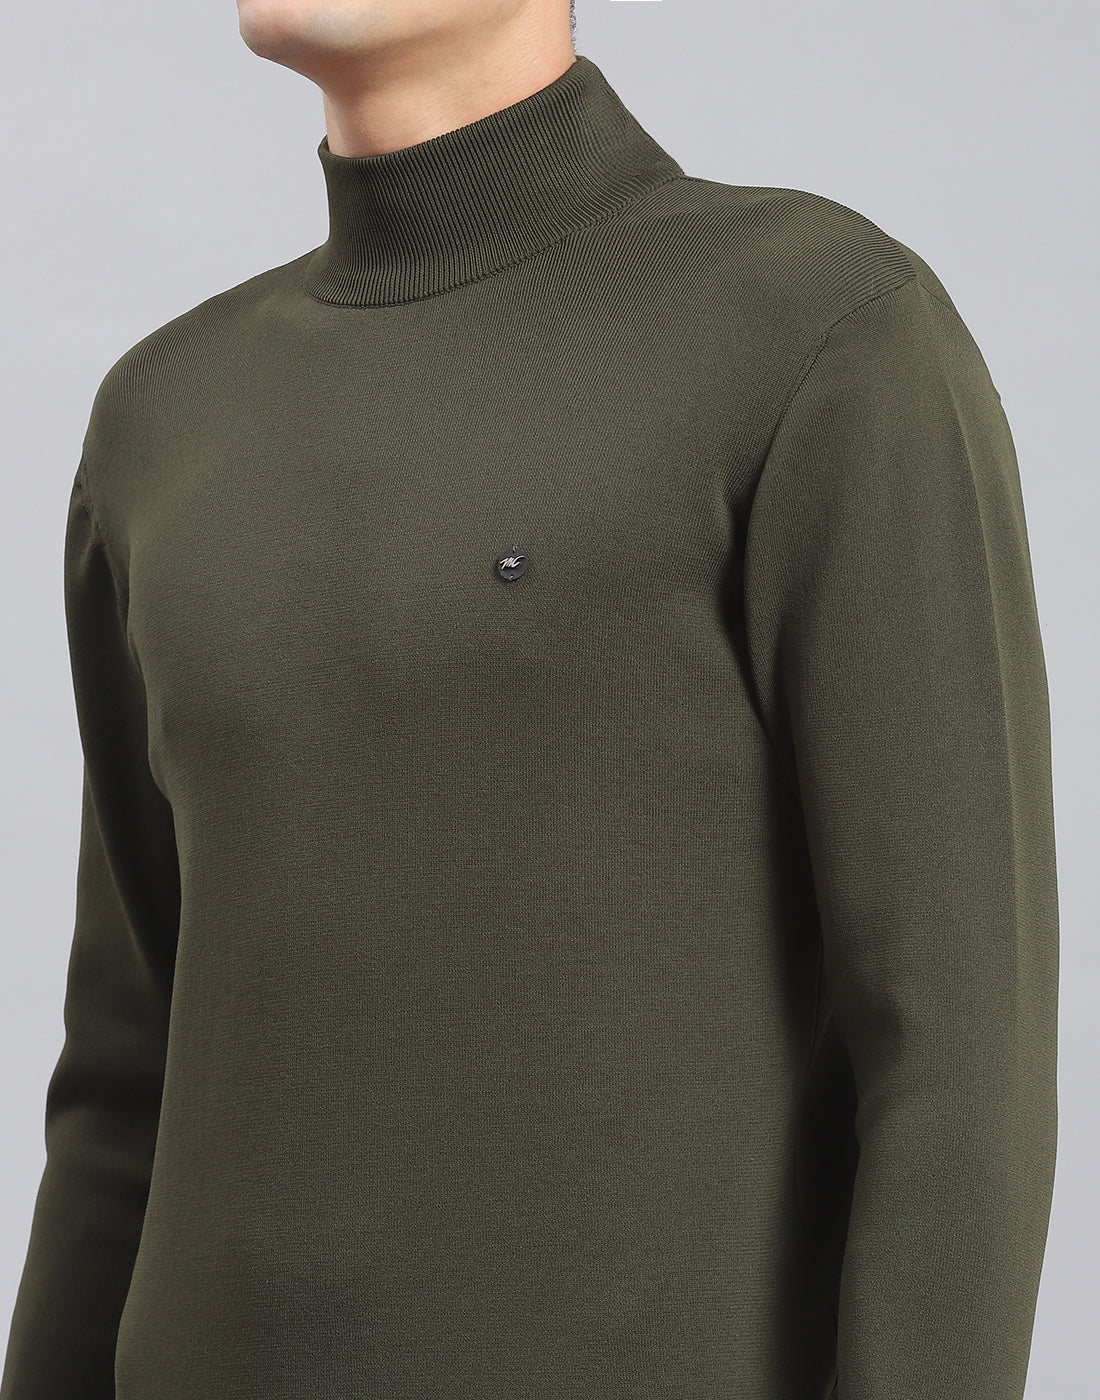 Men Olive Solid T Neck Full Sleeve Sweater